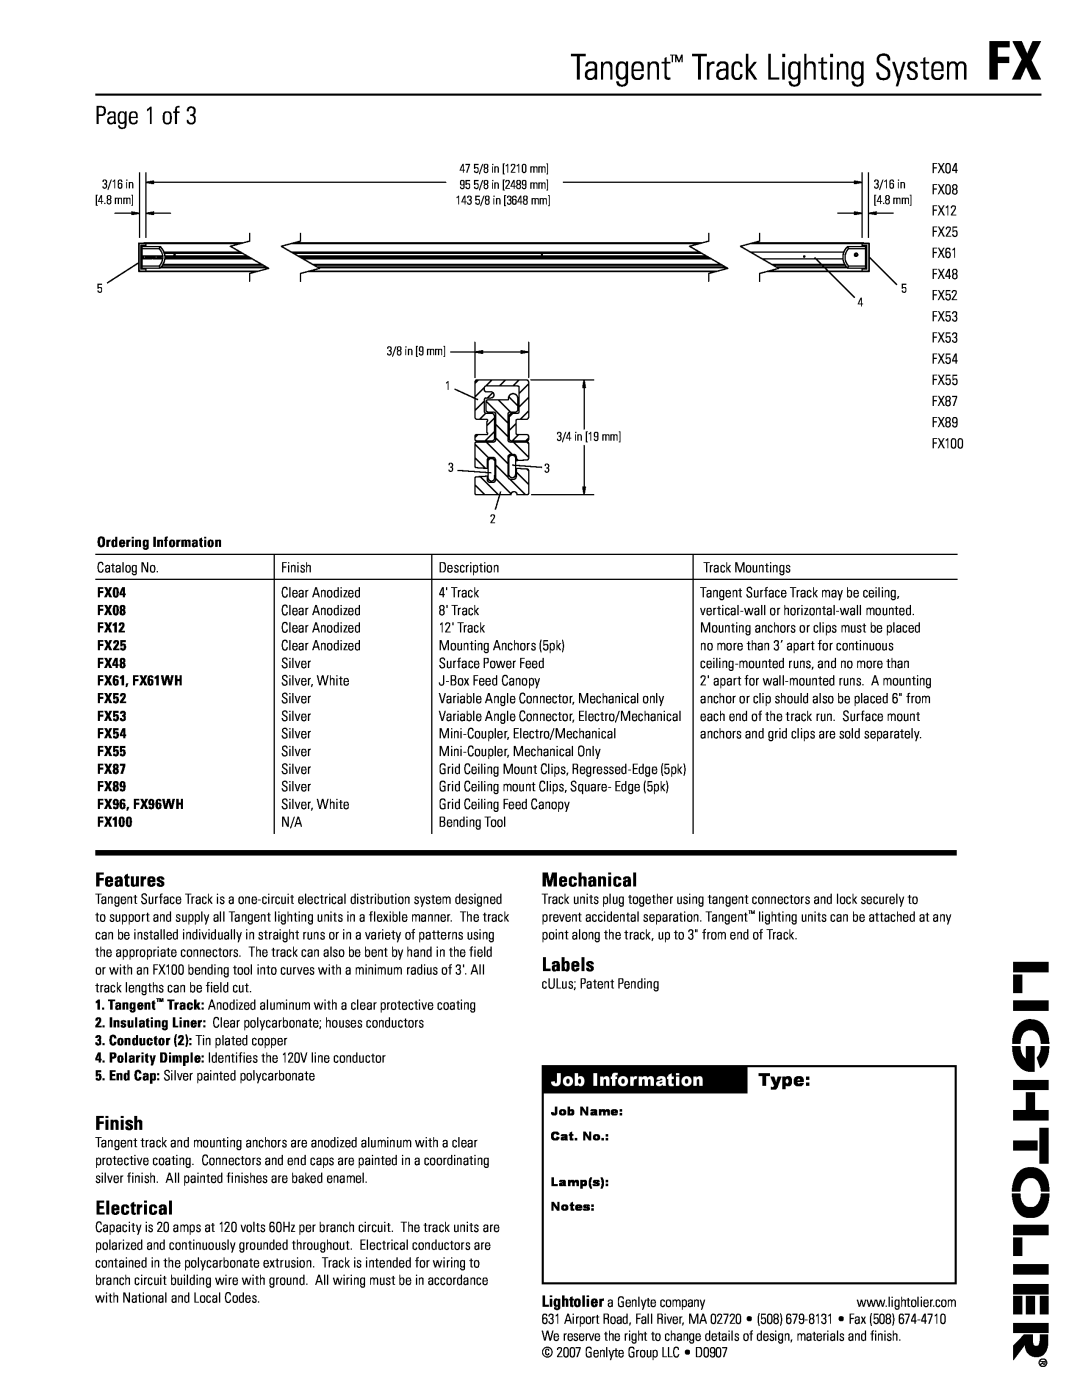 Lightolier FX manual Page, Features, Finish, Electrical, Mechanical, Labels, Job Information, Type, Ordering Information 